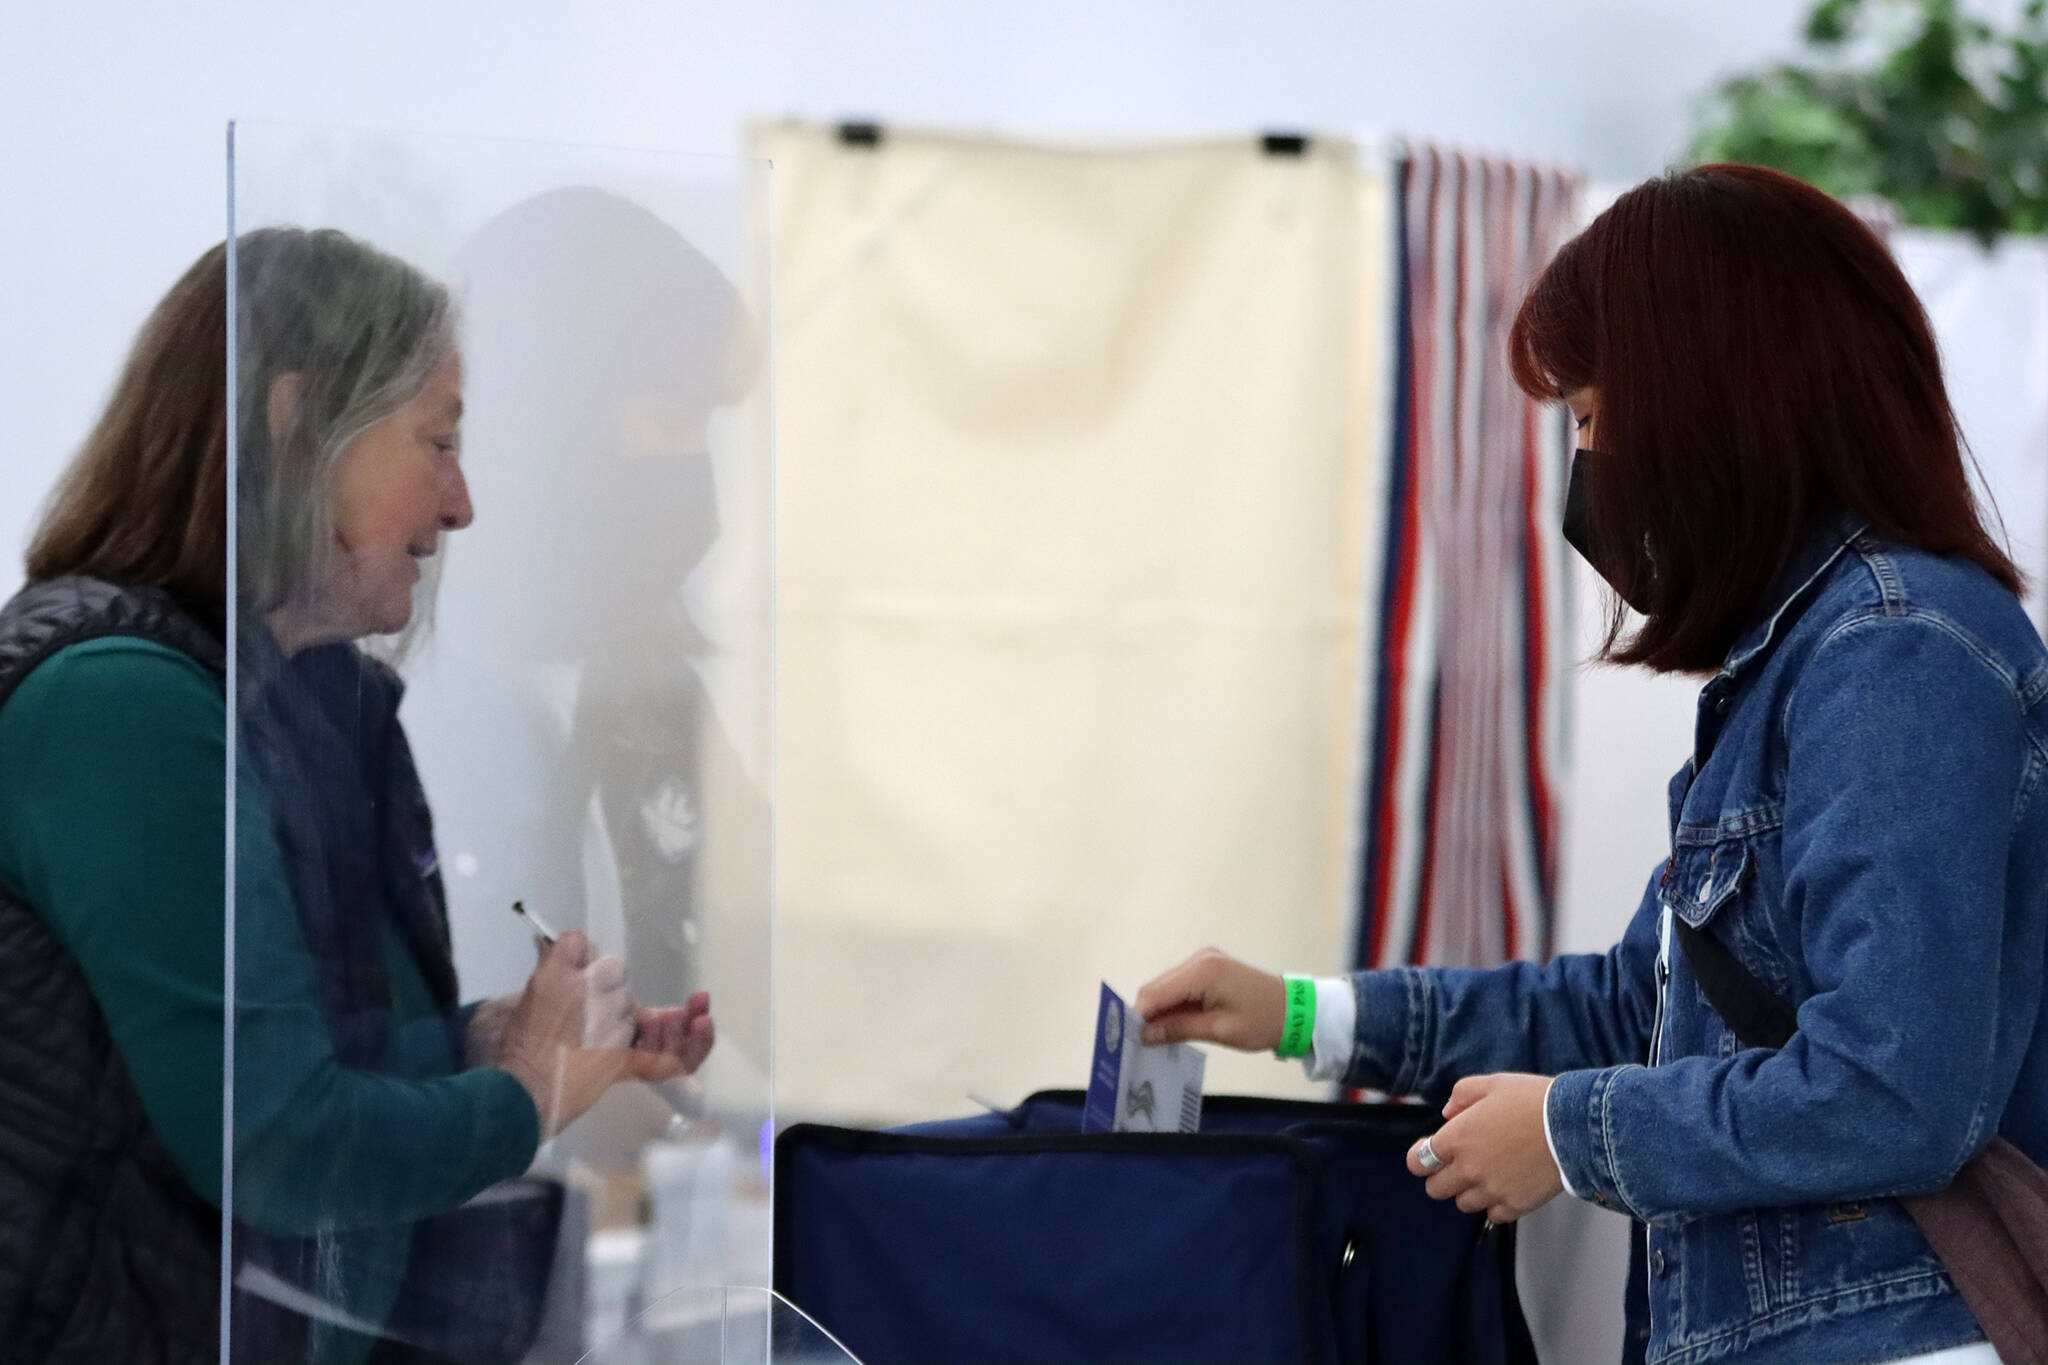 Election official Barb Murray watches as voter Alicia Duncan places her ballot in a receptical during the special primary election to fill Alaksa's lone seat in the U.S. House of Representatives. (Ben Hohenstatt / Juneau Empire)